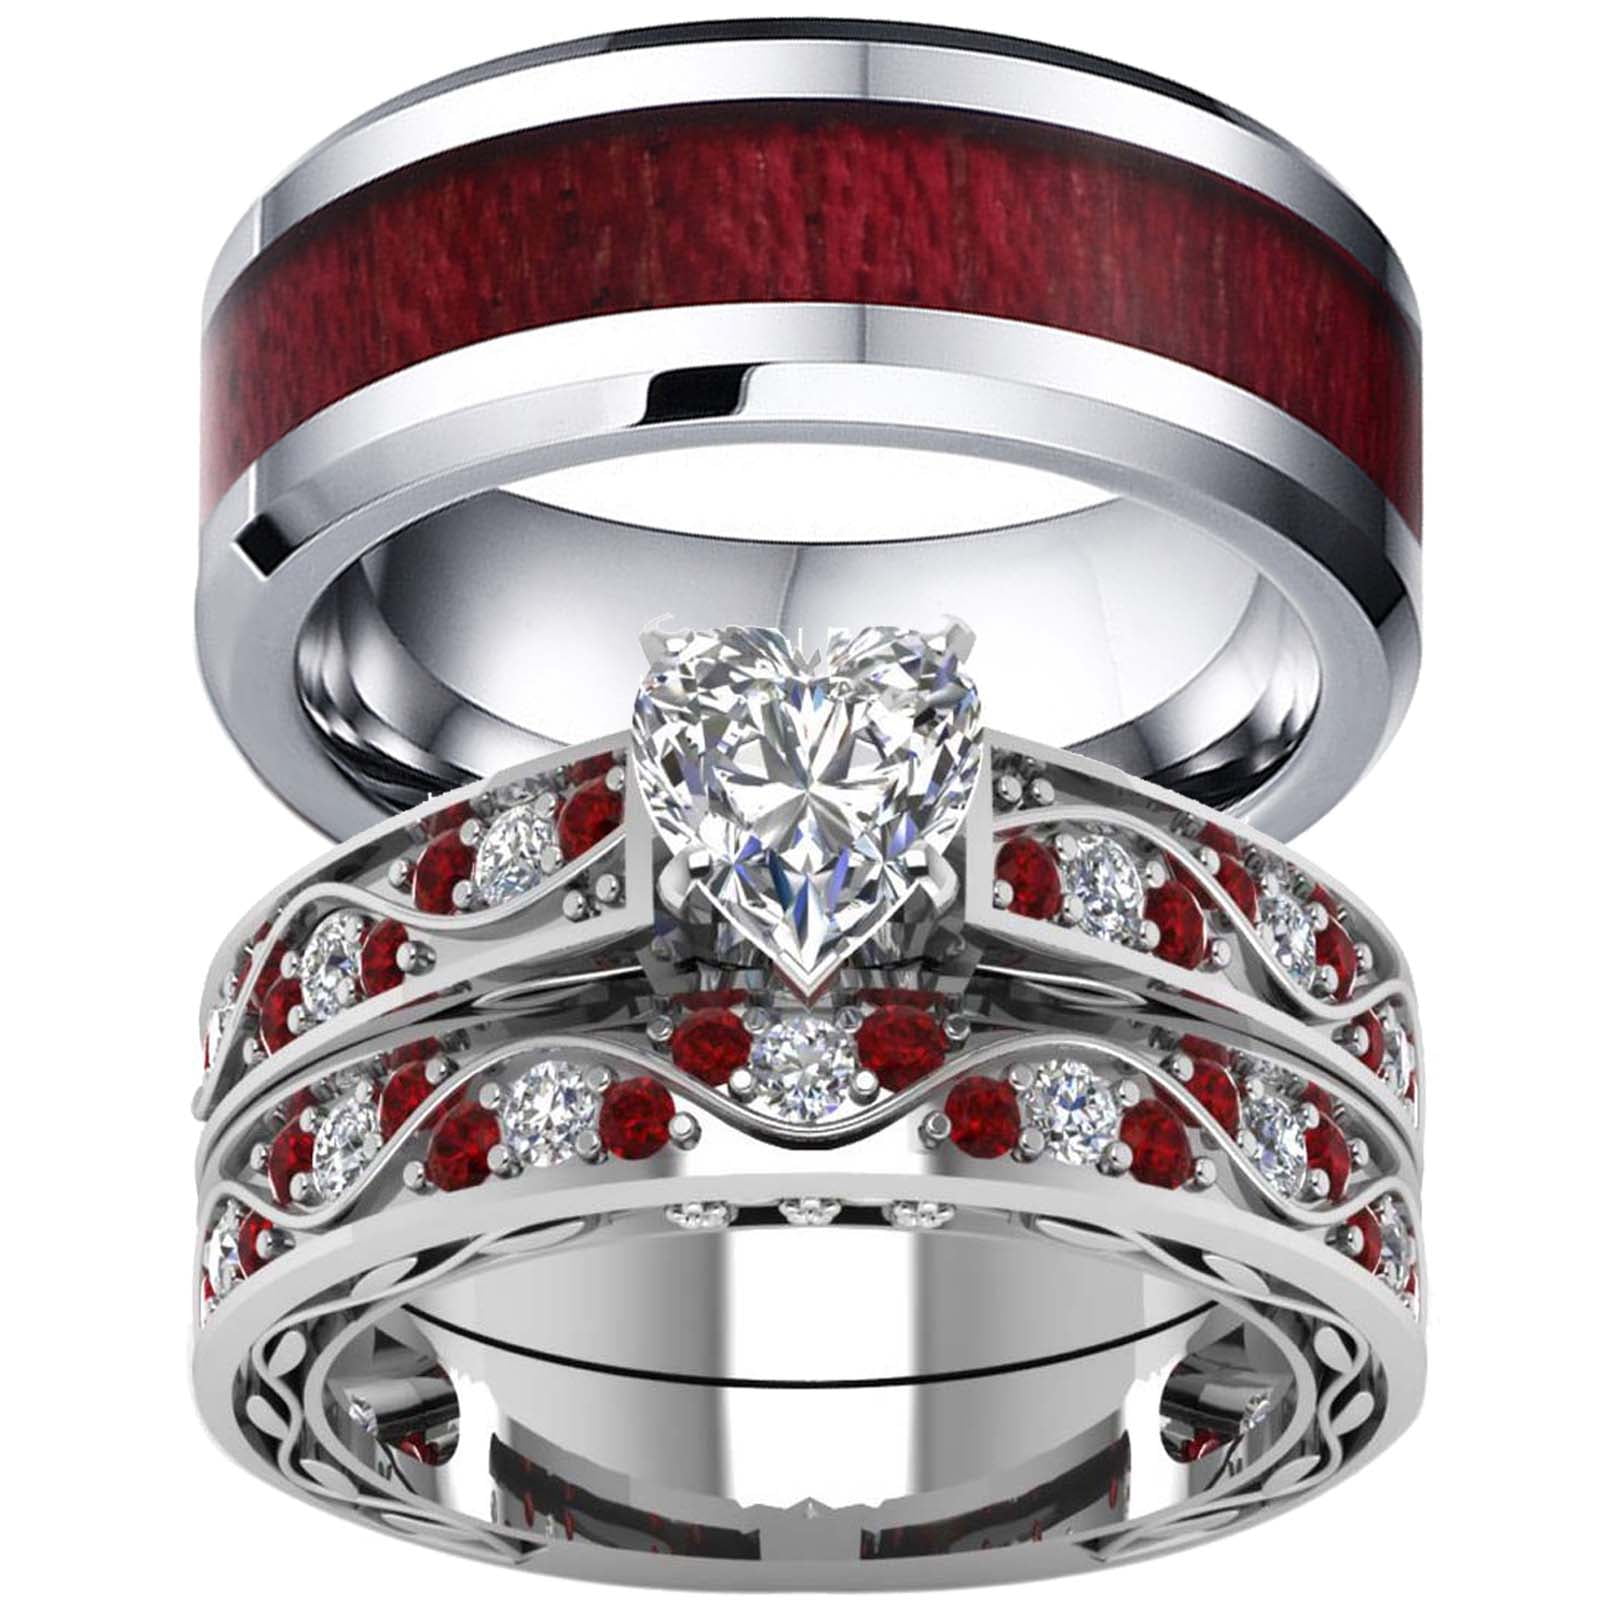 Matching Rings Couple Rings 1CT Red Cz Wedding Ring Sets Black Gold Female  Ring - Walmart.com